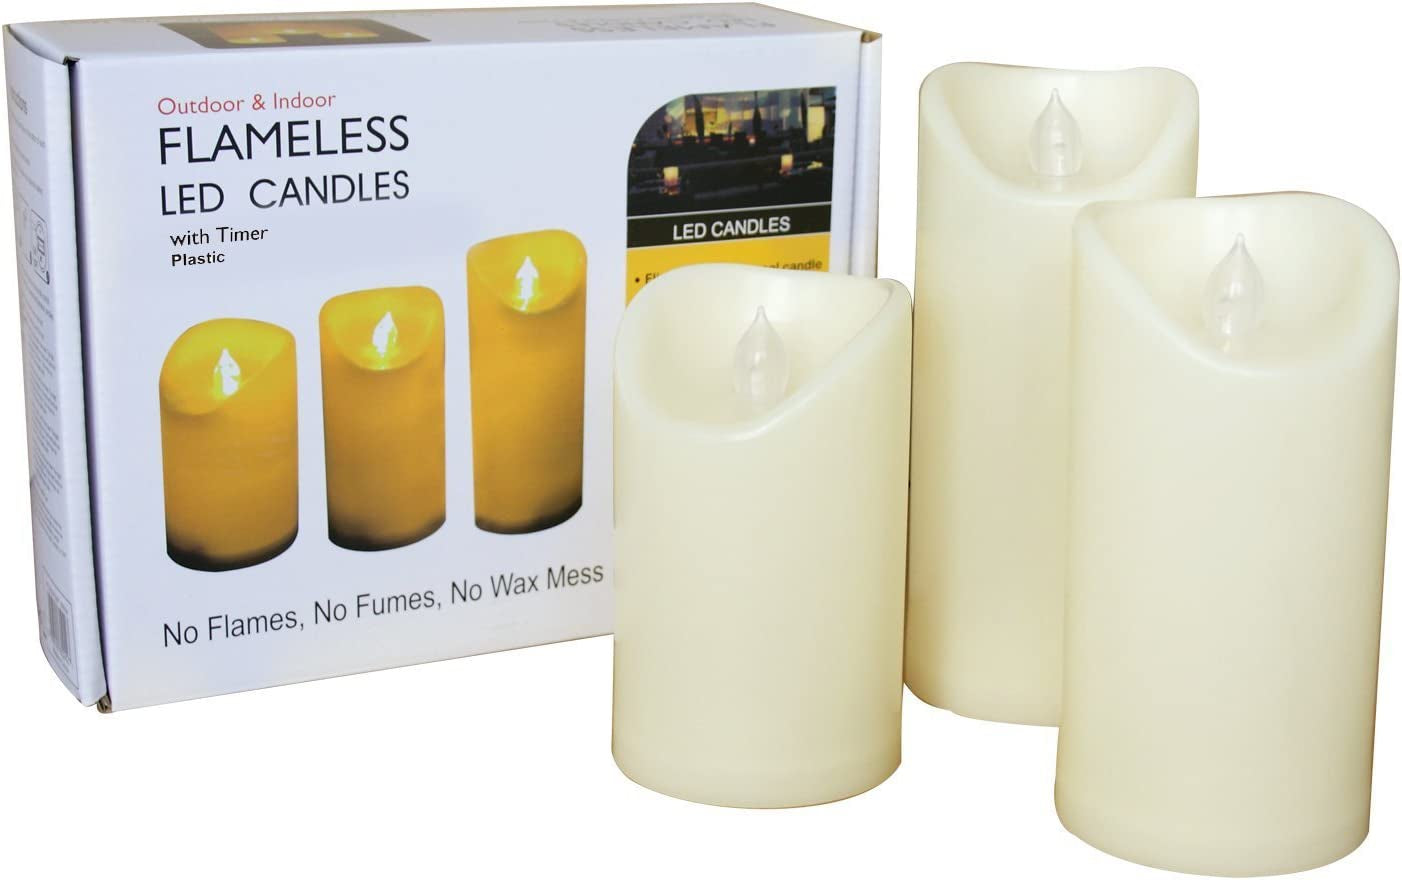 "Waterproof Outdoor Battery Operated Flameless Pillar Candles with Timer - Realistic Flickering LED Lights for Lantern Garden Wedding Christmas Decorations - Pack of 3"